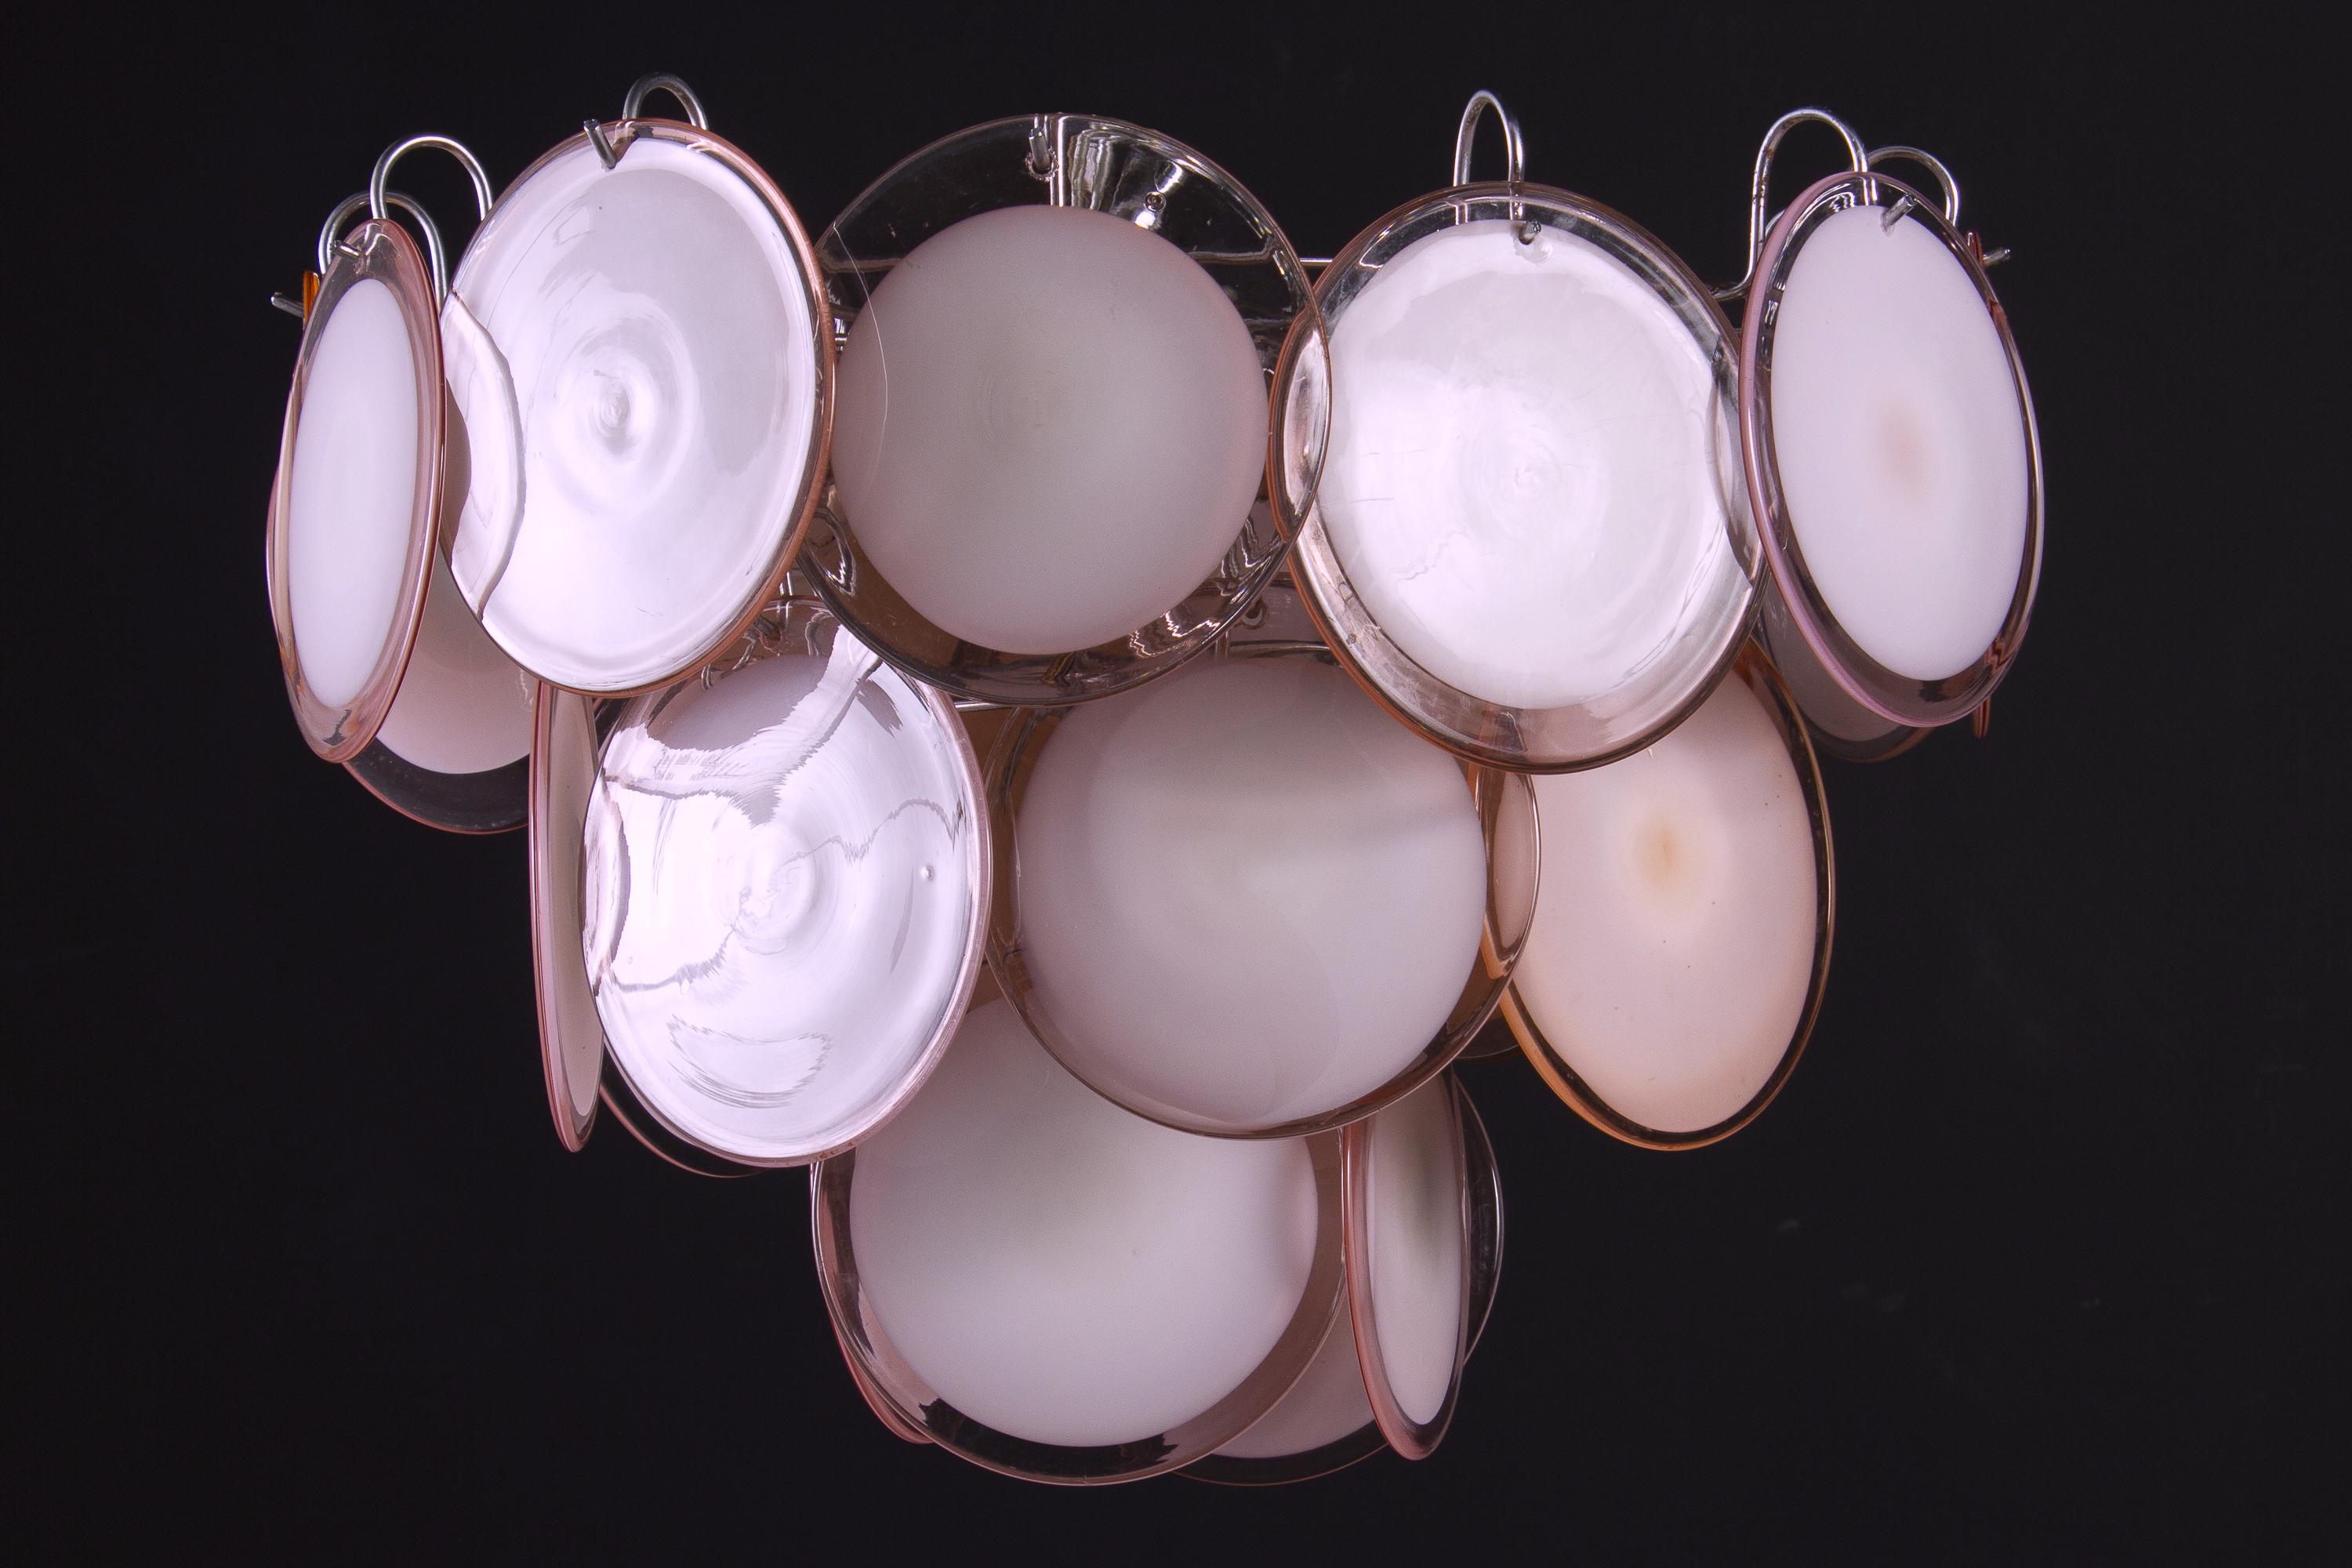 The 24 pale pink discs of precious Murano glass are arranged on three levels.
Available also a chain and canopy price included.
Wired for US standards. Eight E 14 light bulbs.